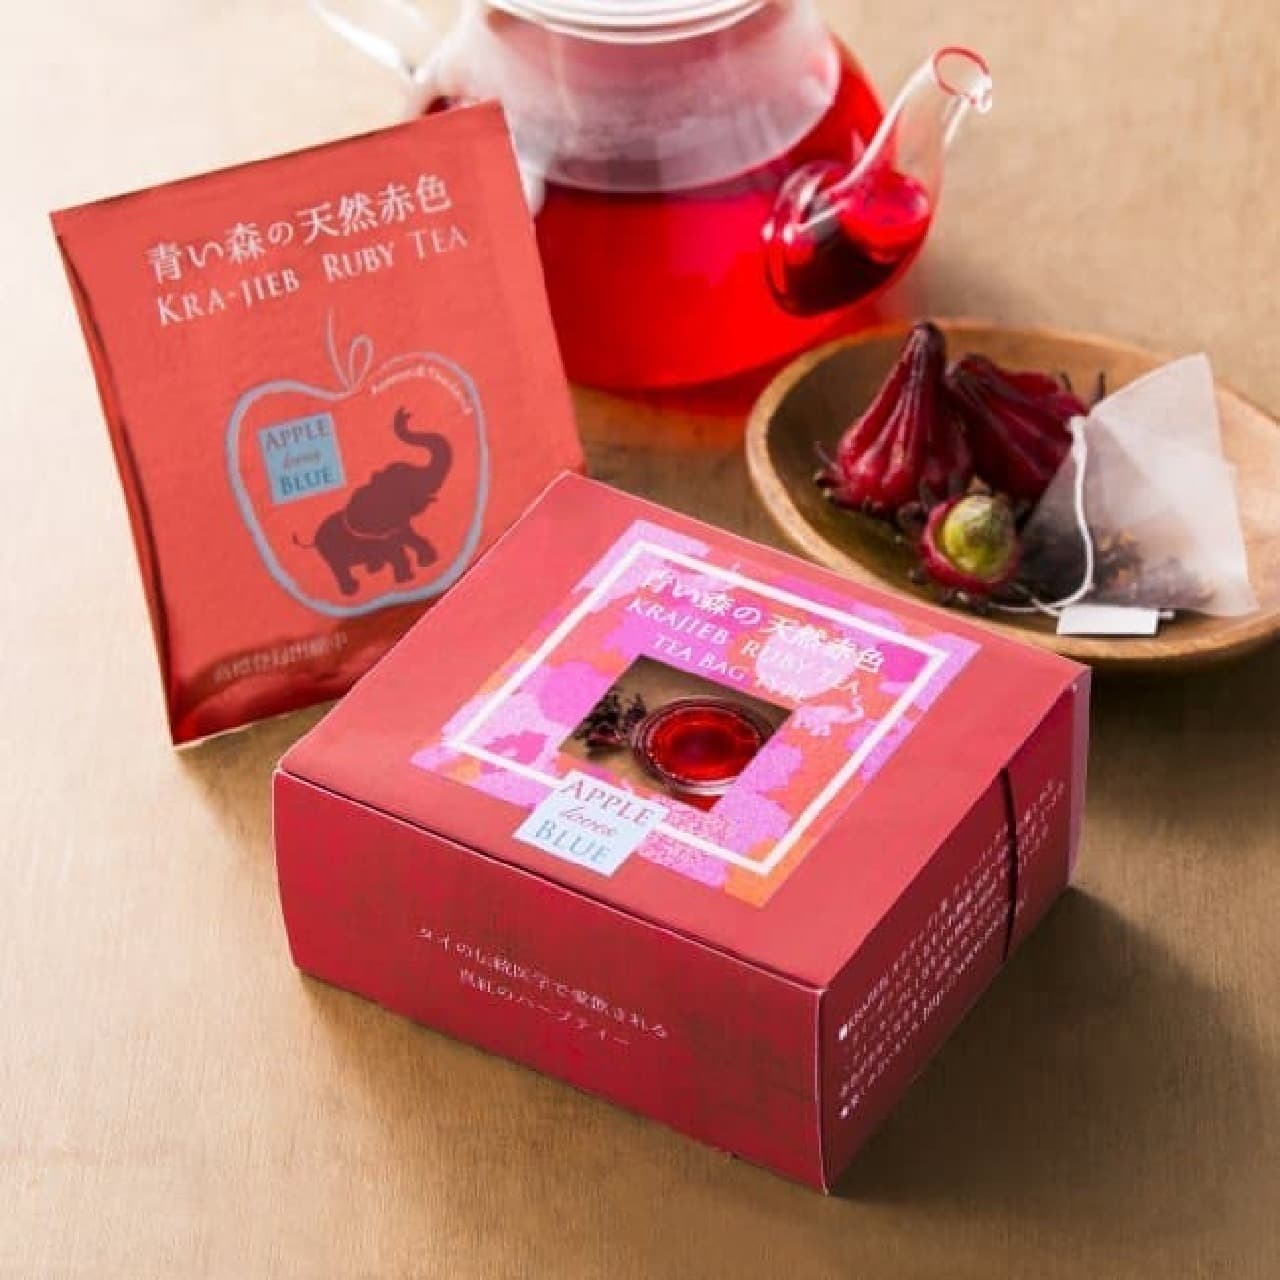 Blue Forest Natural Red Gachiup Ruby Tea